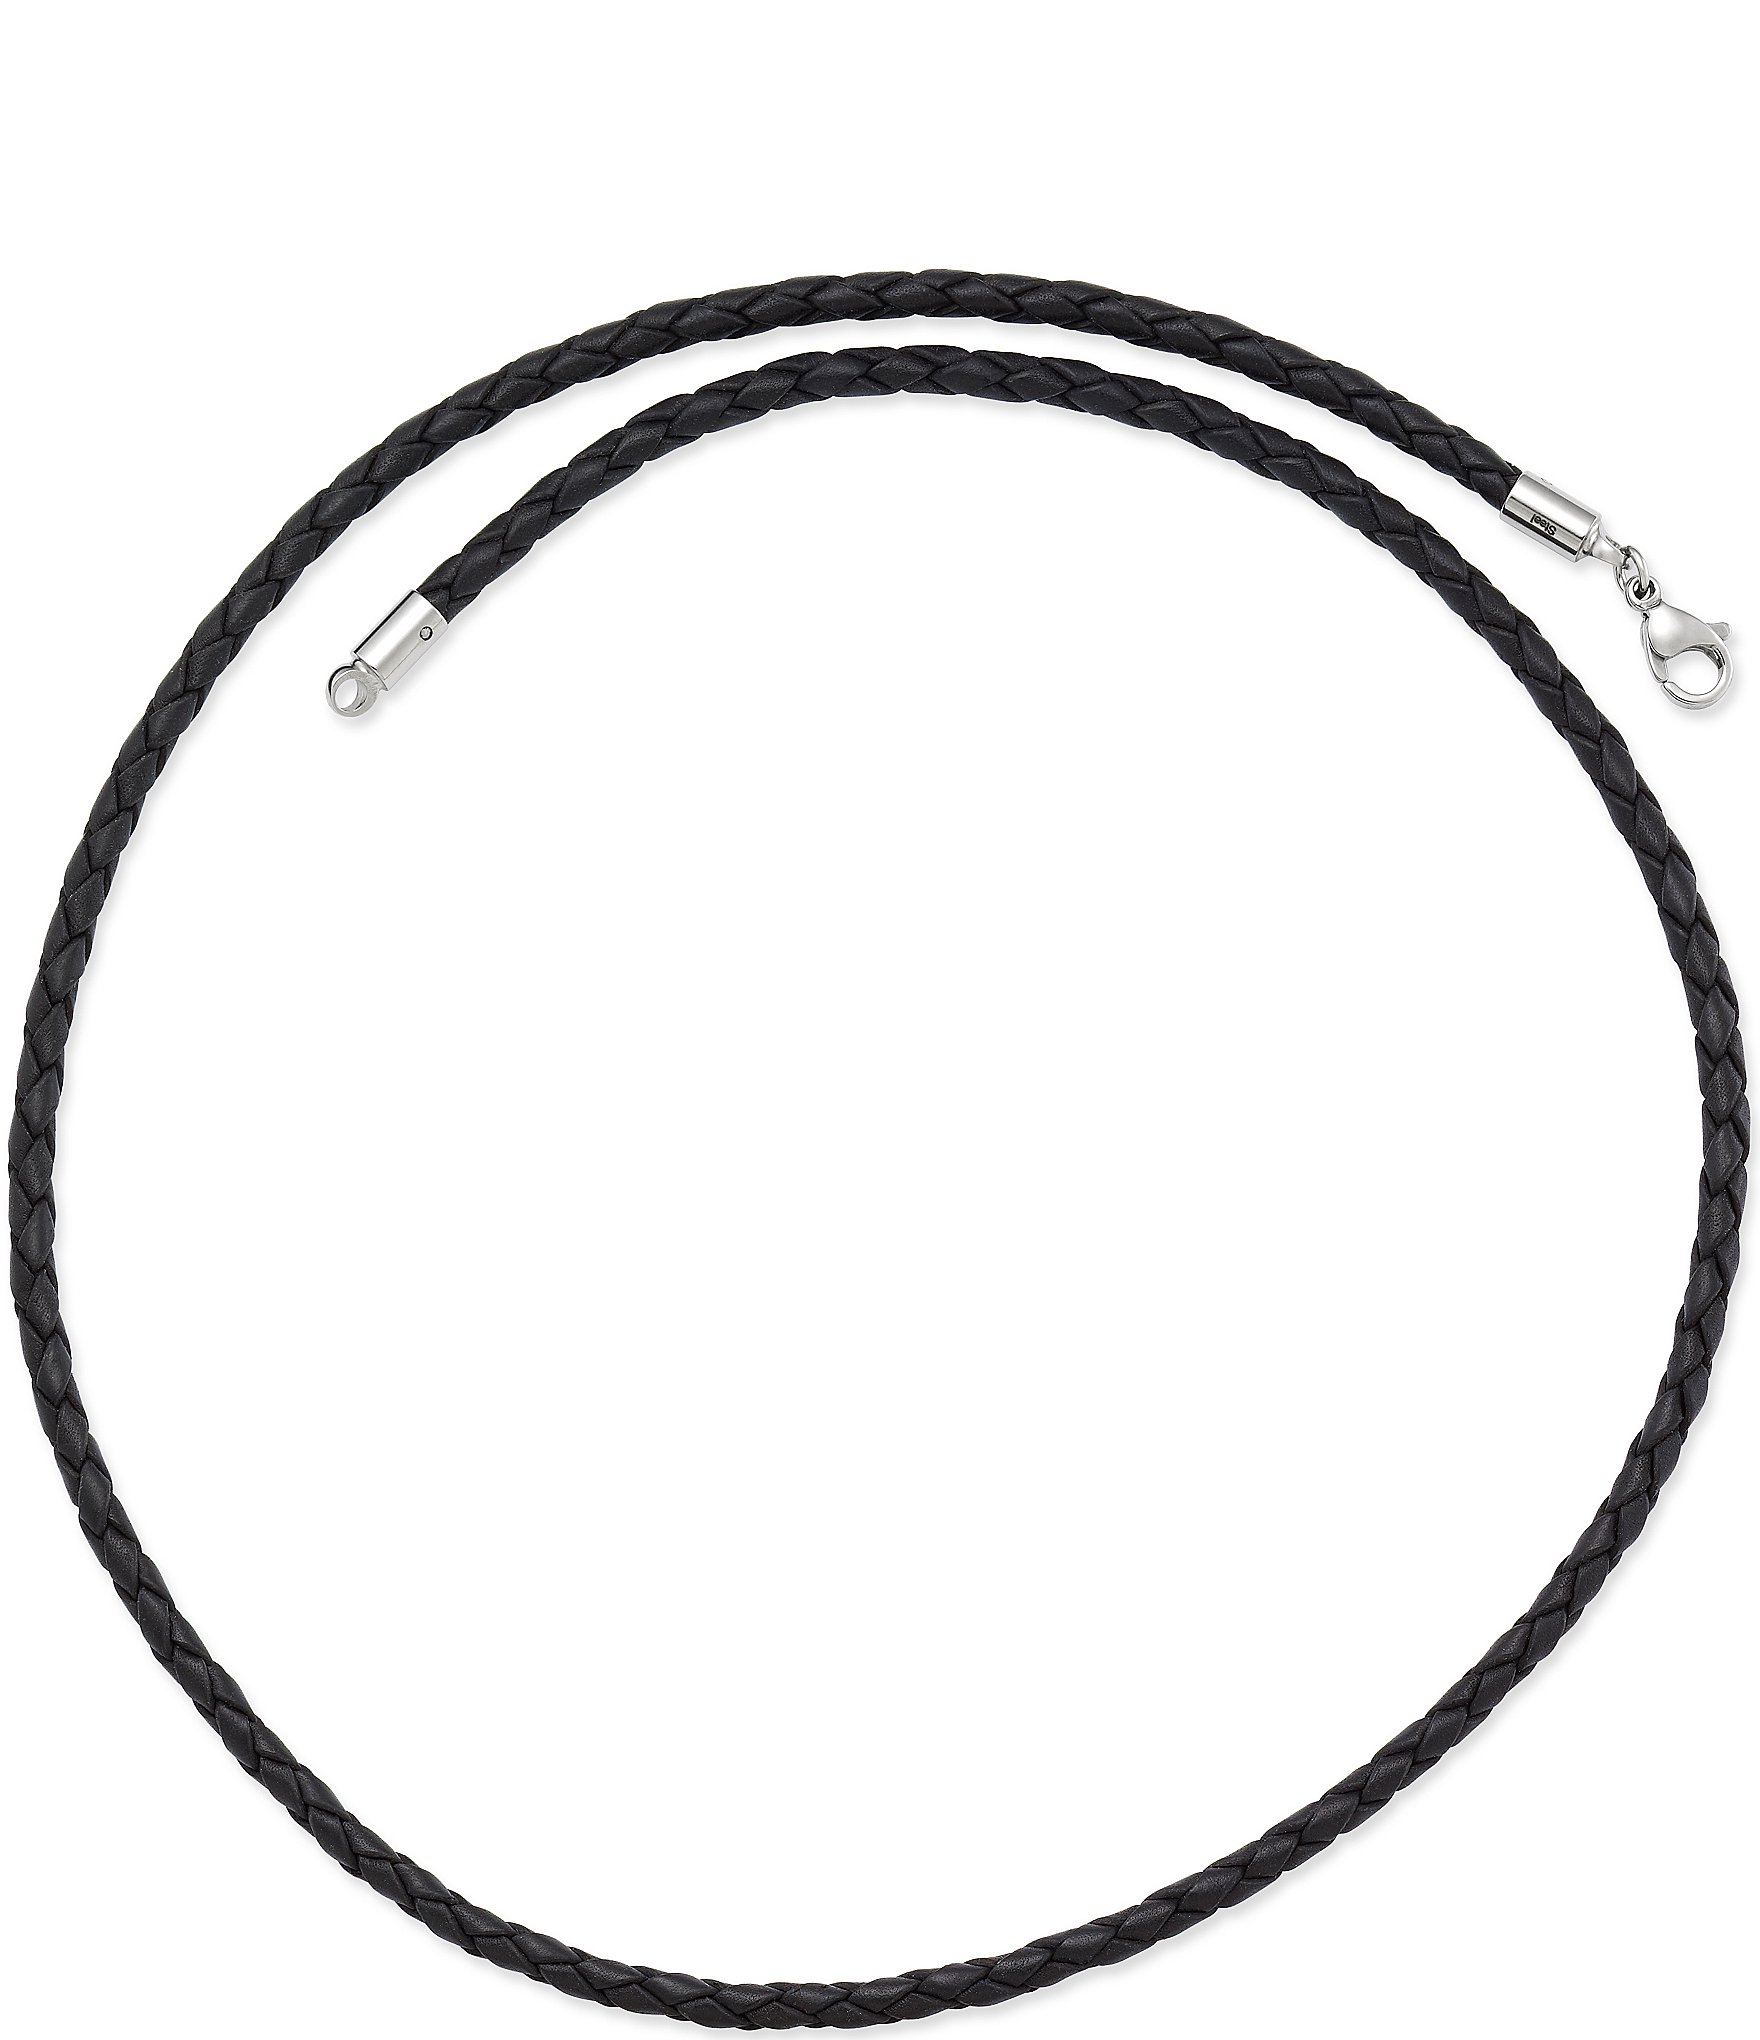 James Avery Braided Black Leather Necklace - 22 in.